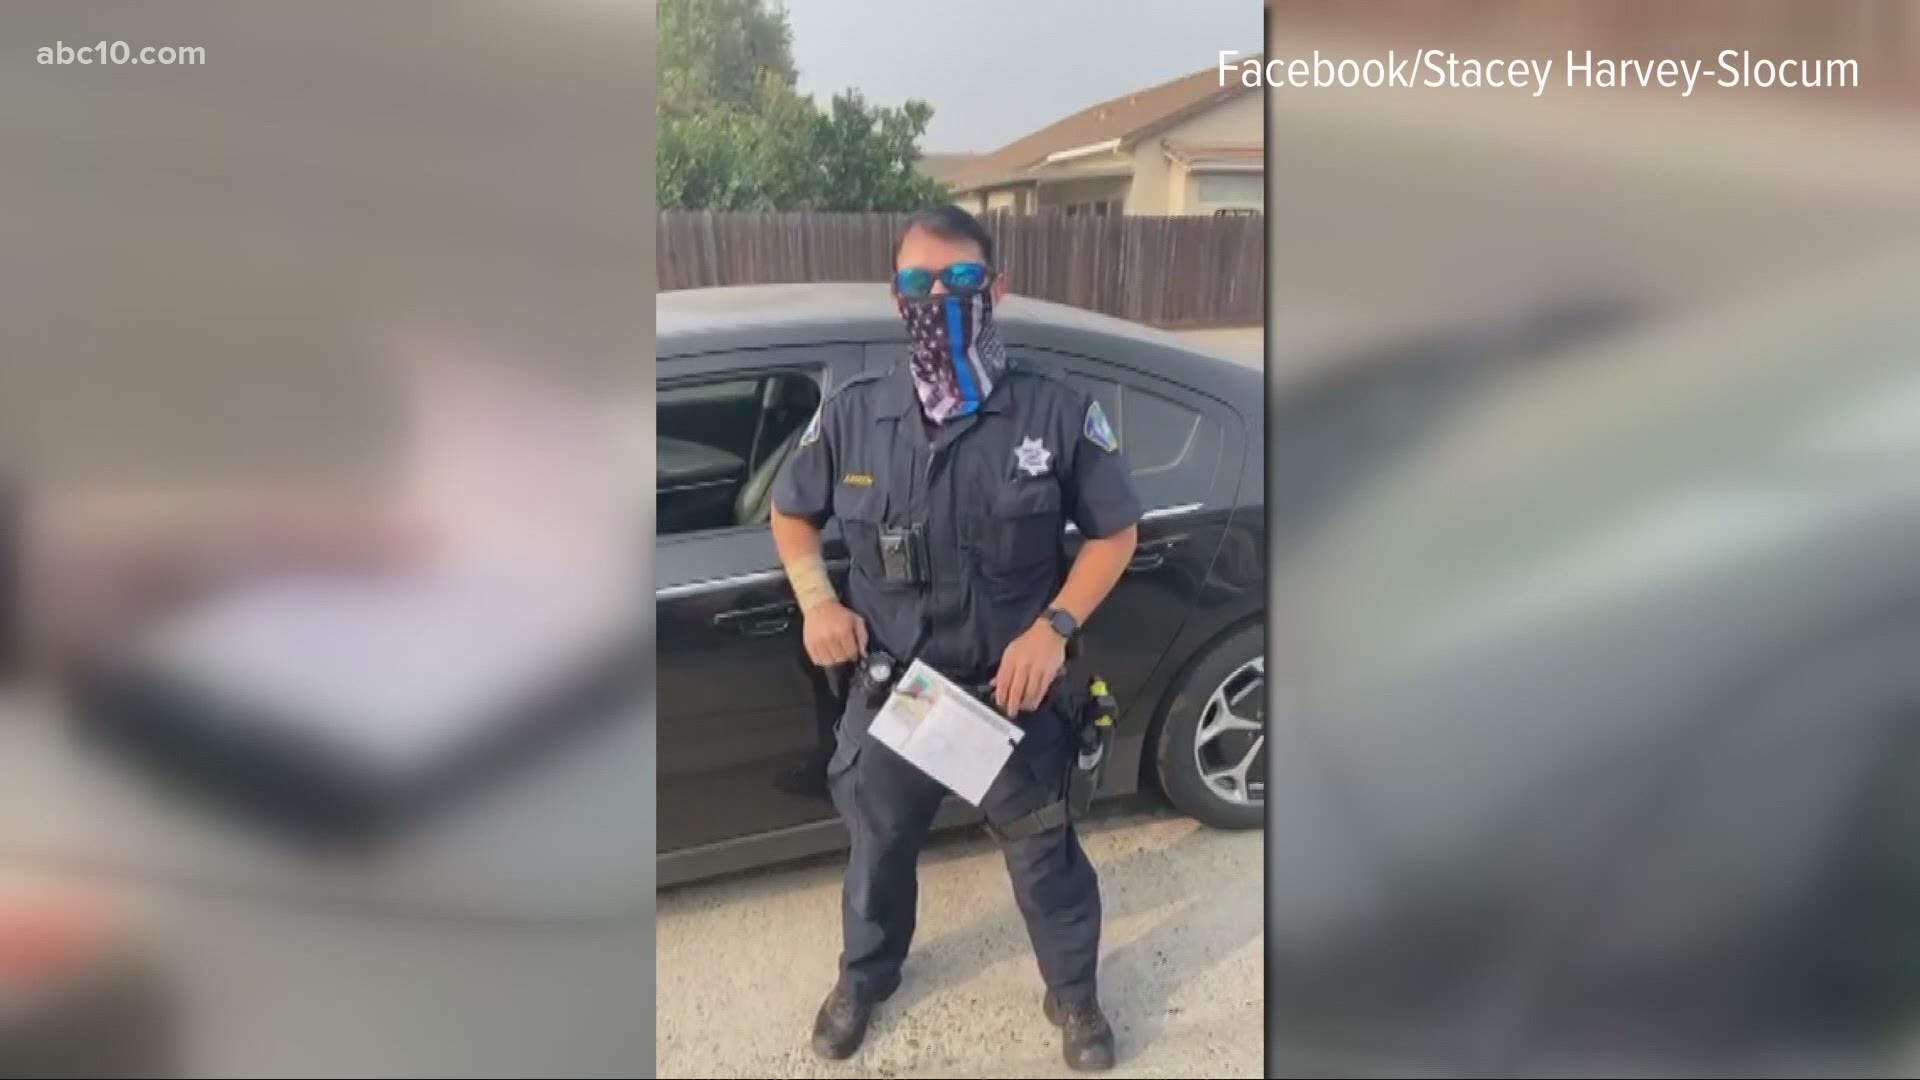 The teen was pulled over for allegedly rolling a stop sign when his mom started recording the interaction between him and the officer.